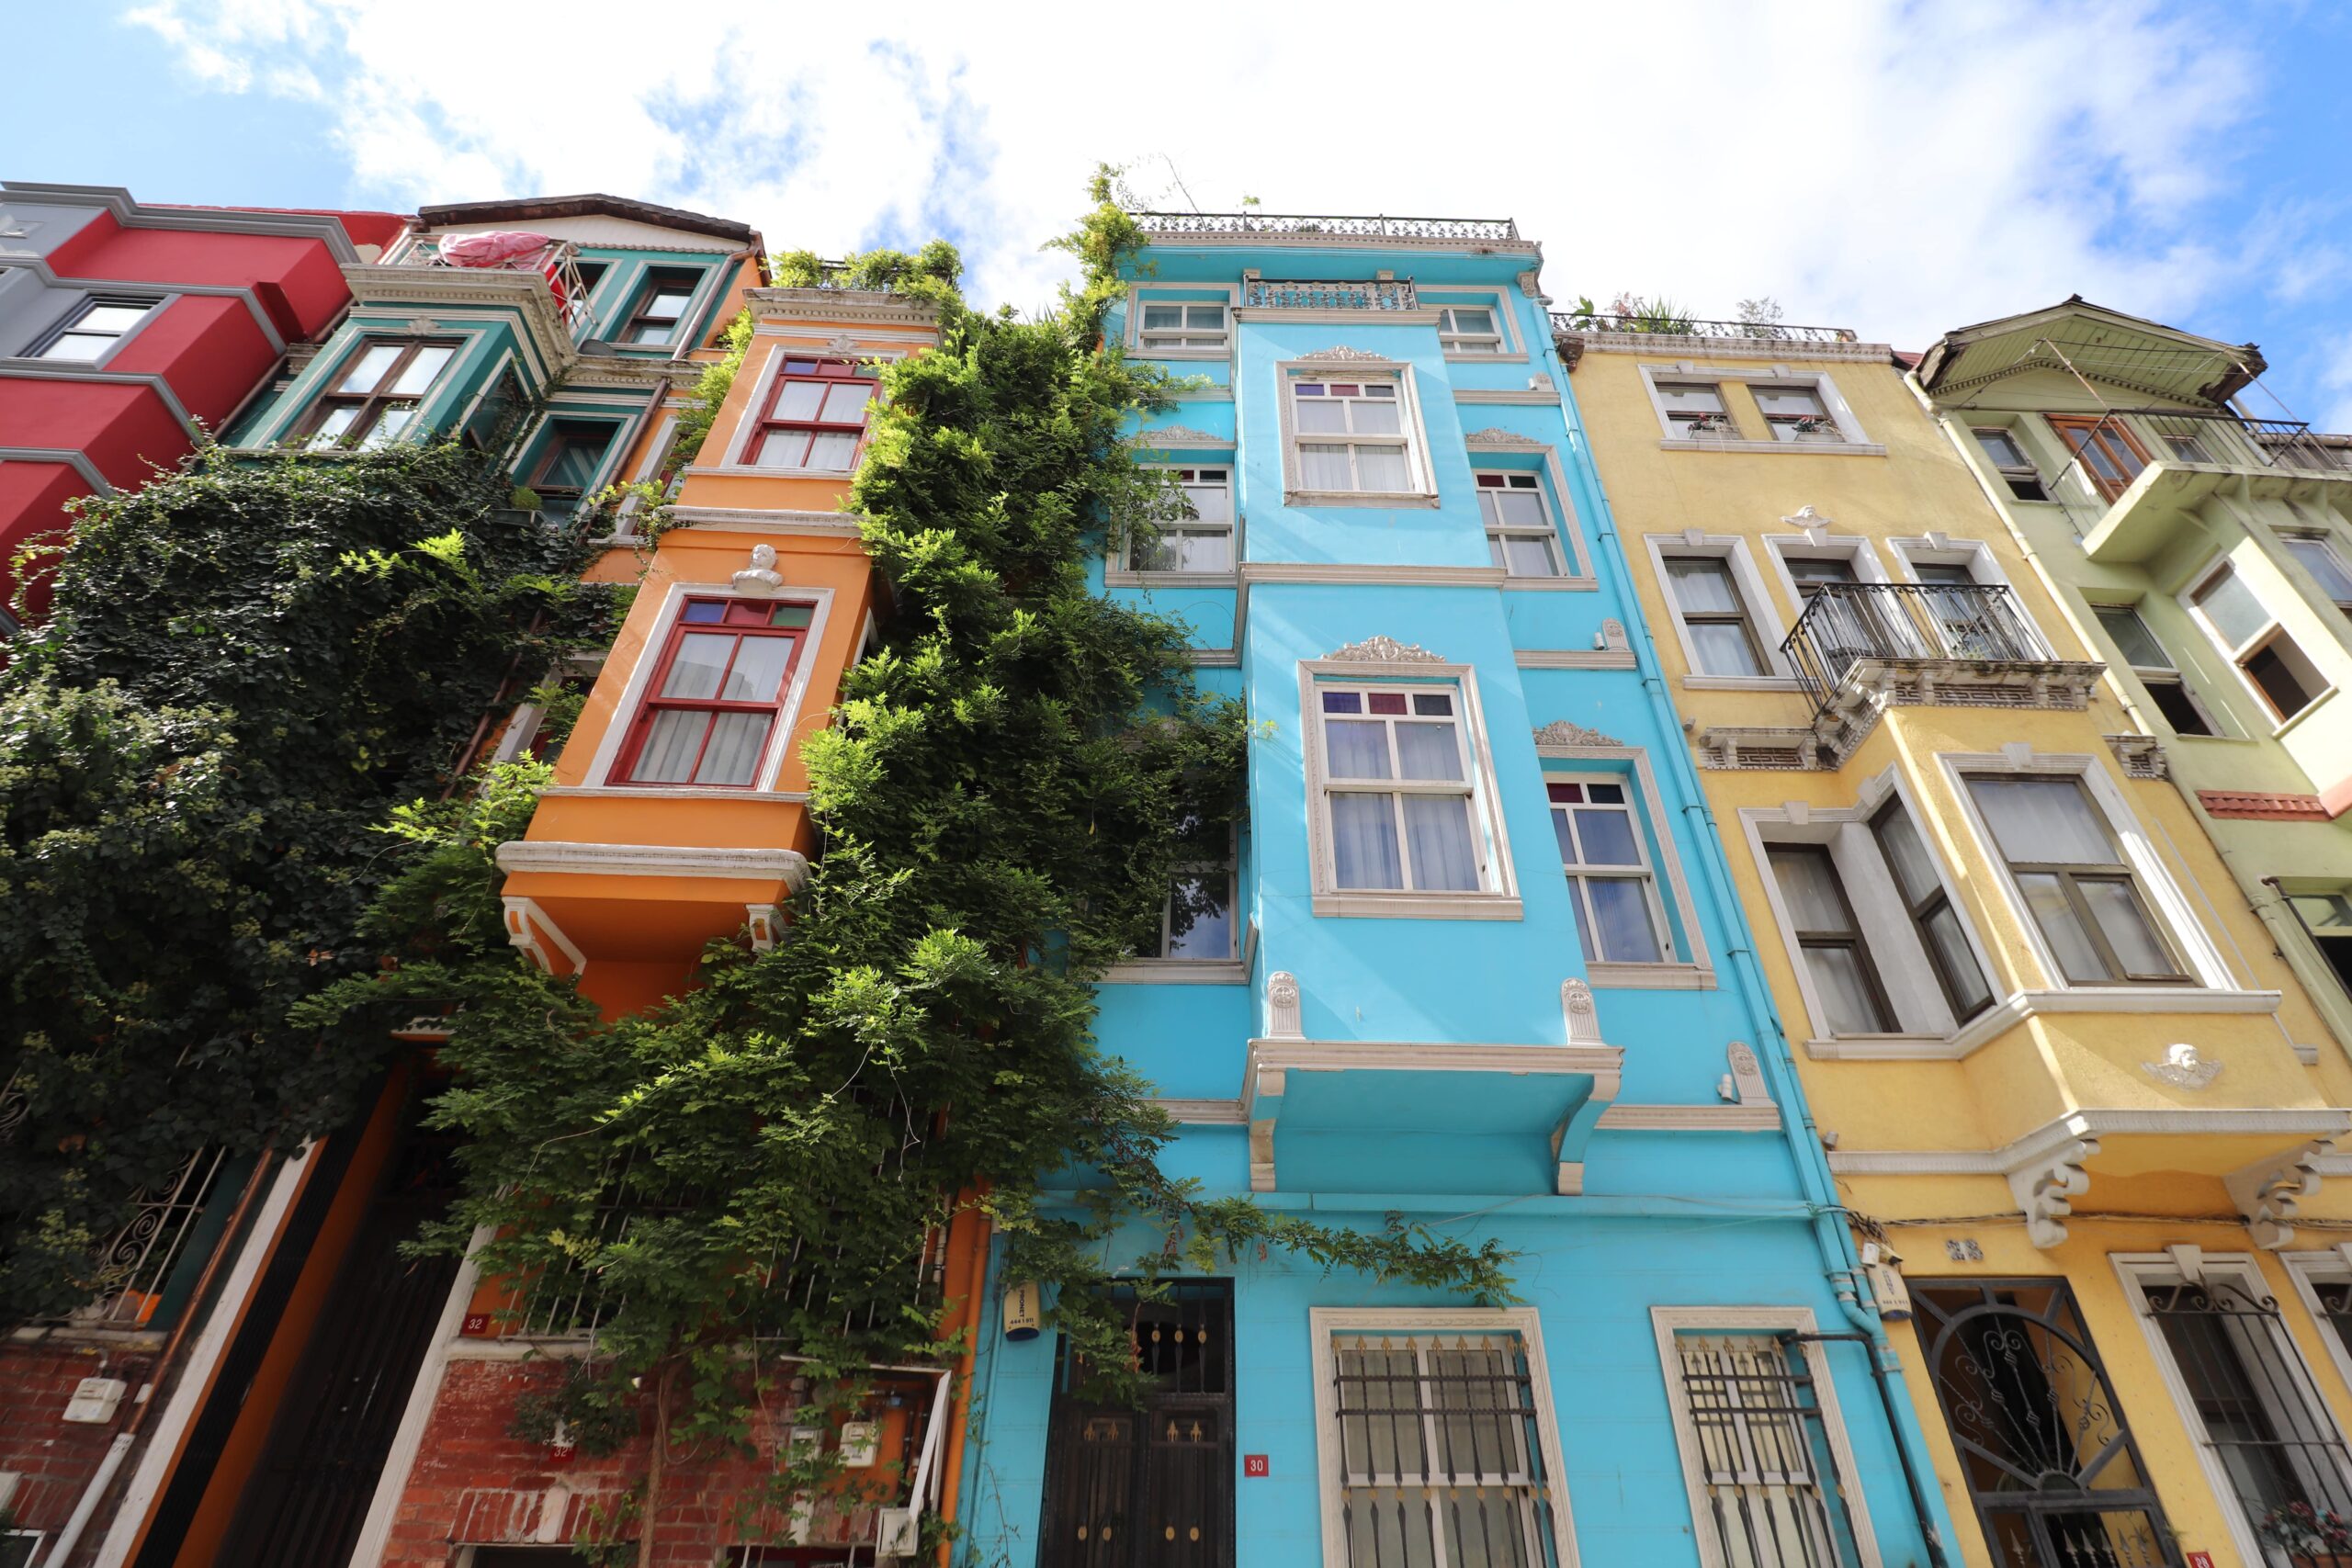 23 Unique Things to Do in Istanbul